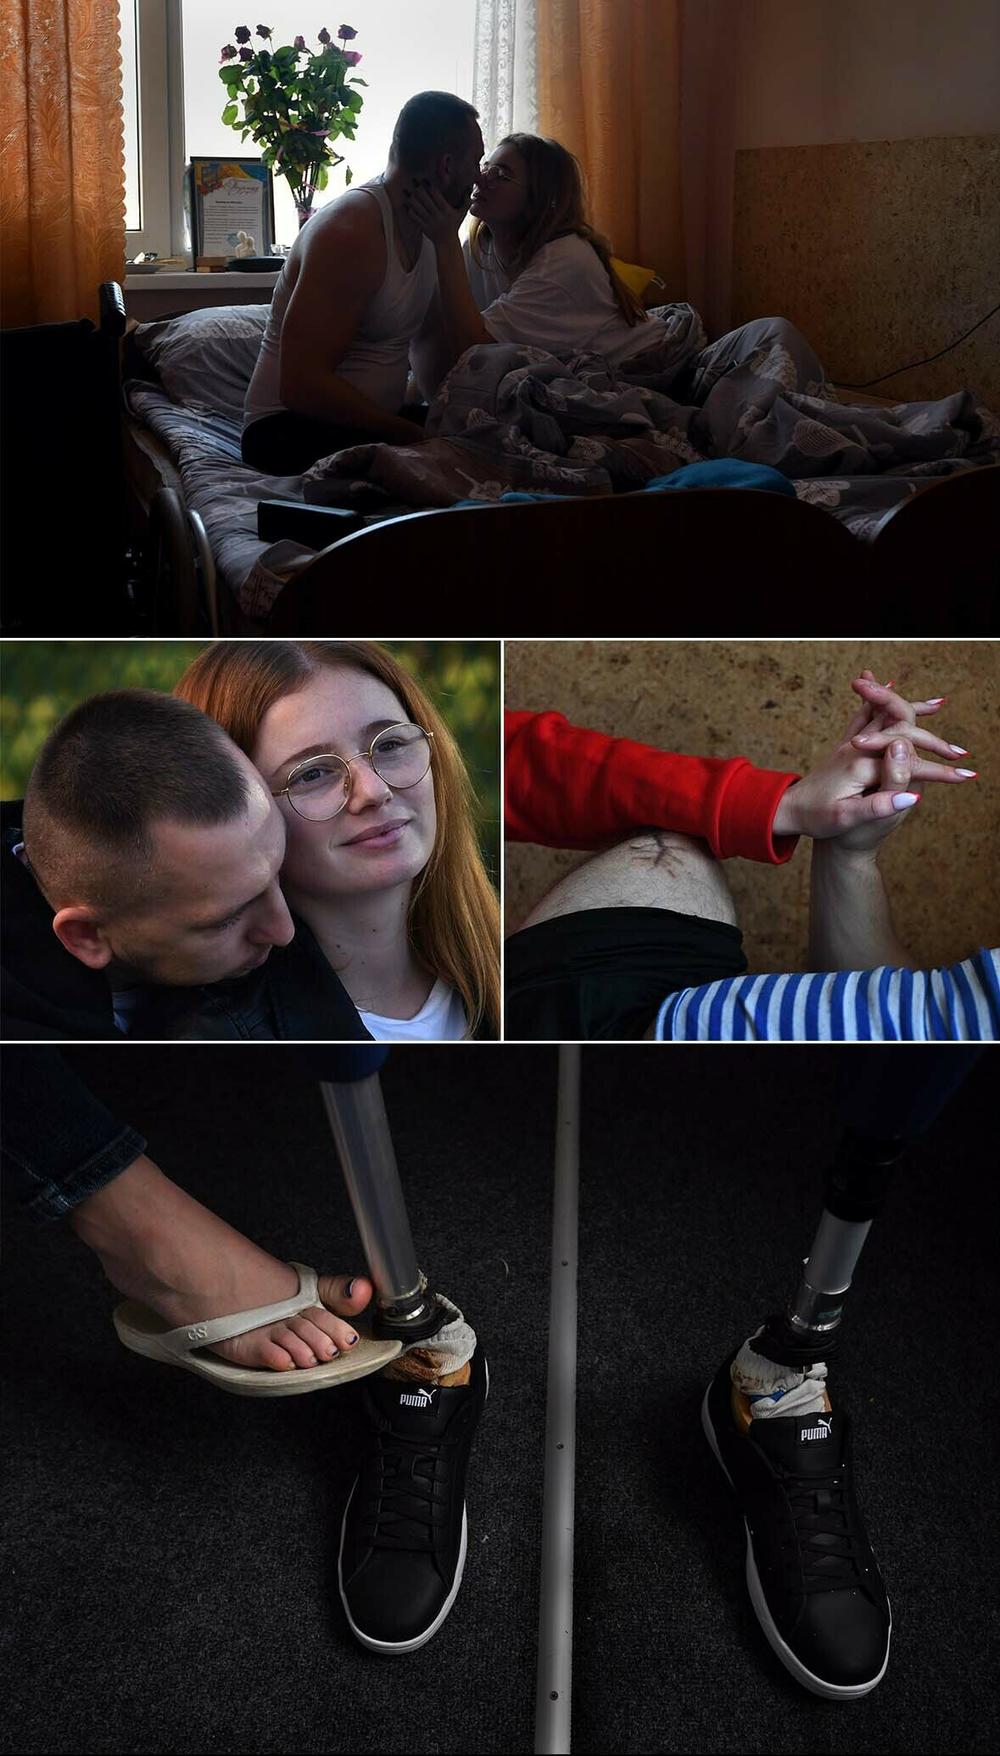 Top: Misha and Ira sharing a moment in their room at Truskavets City Hospital. Middle left: Misha and Ira wait outside for air raid sirens to stop. Middle right: Holding hands. Bottom: Playing footsie.